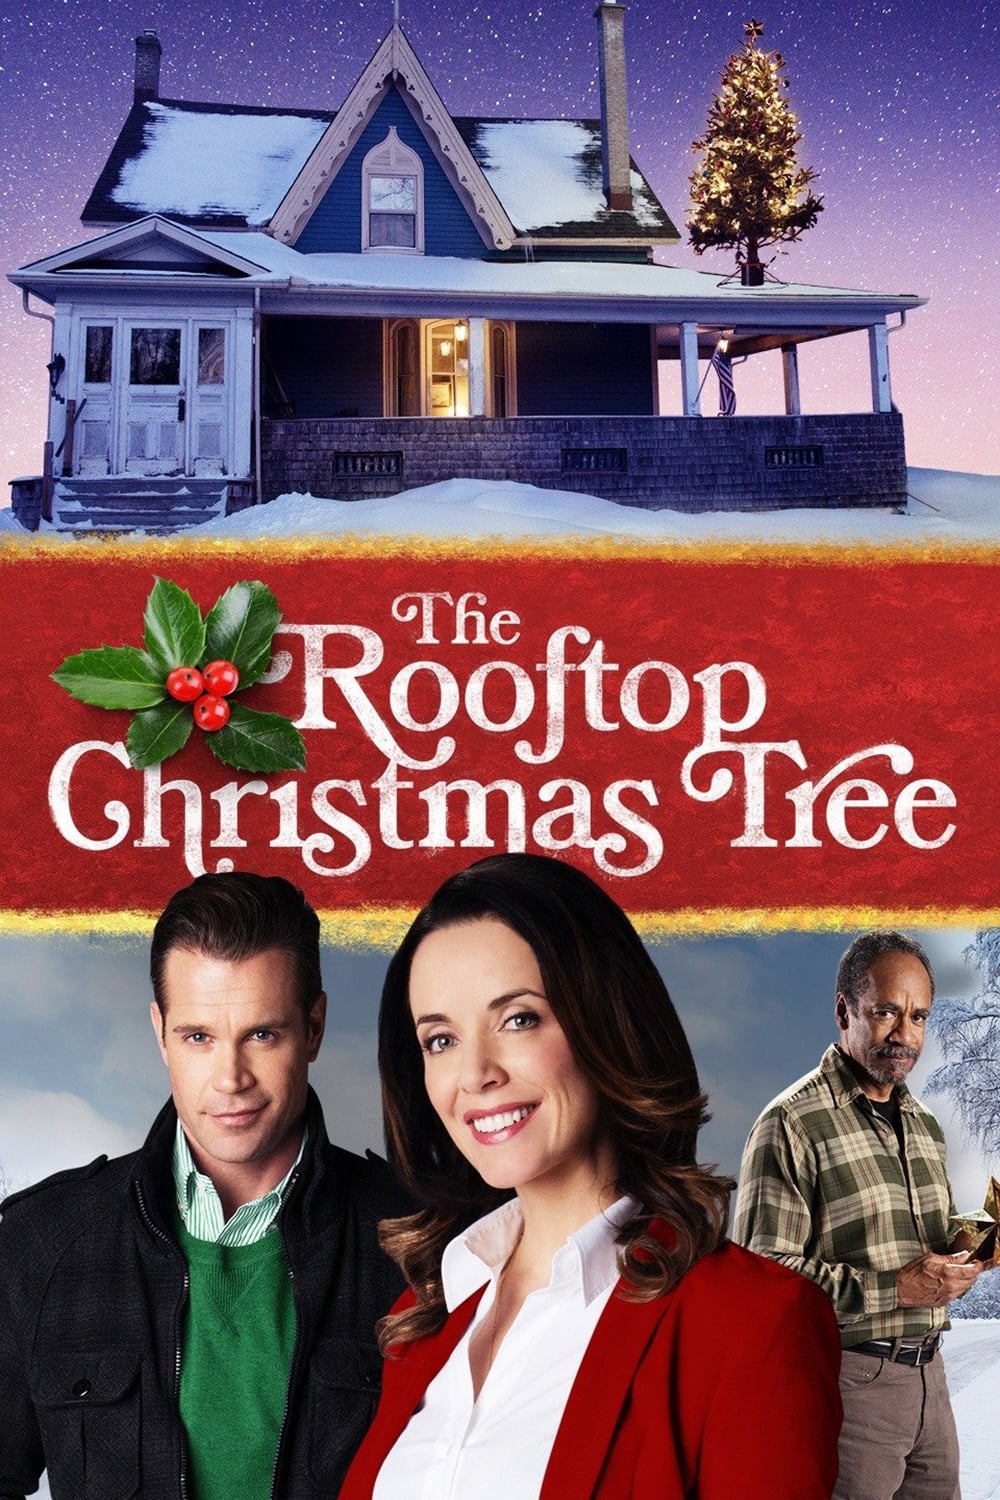 The Rooftop Christmas Tree film